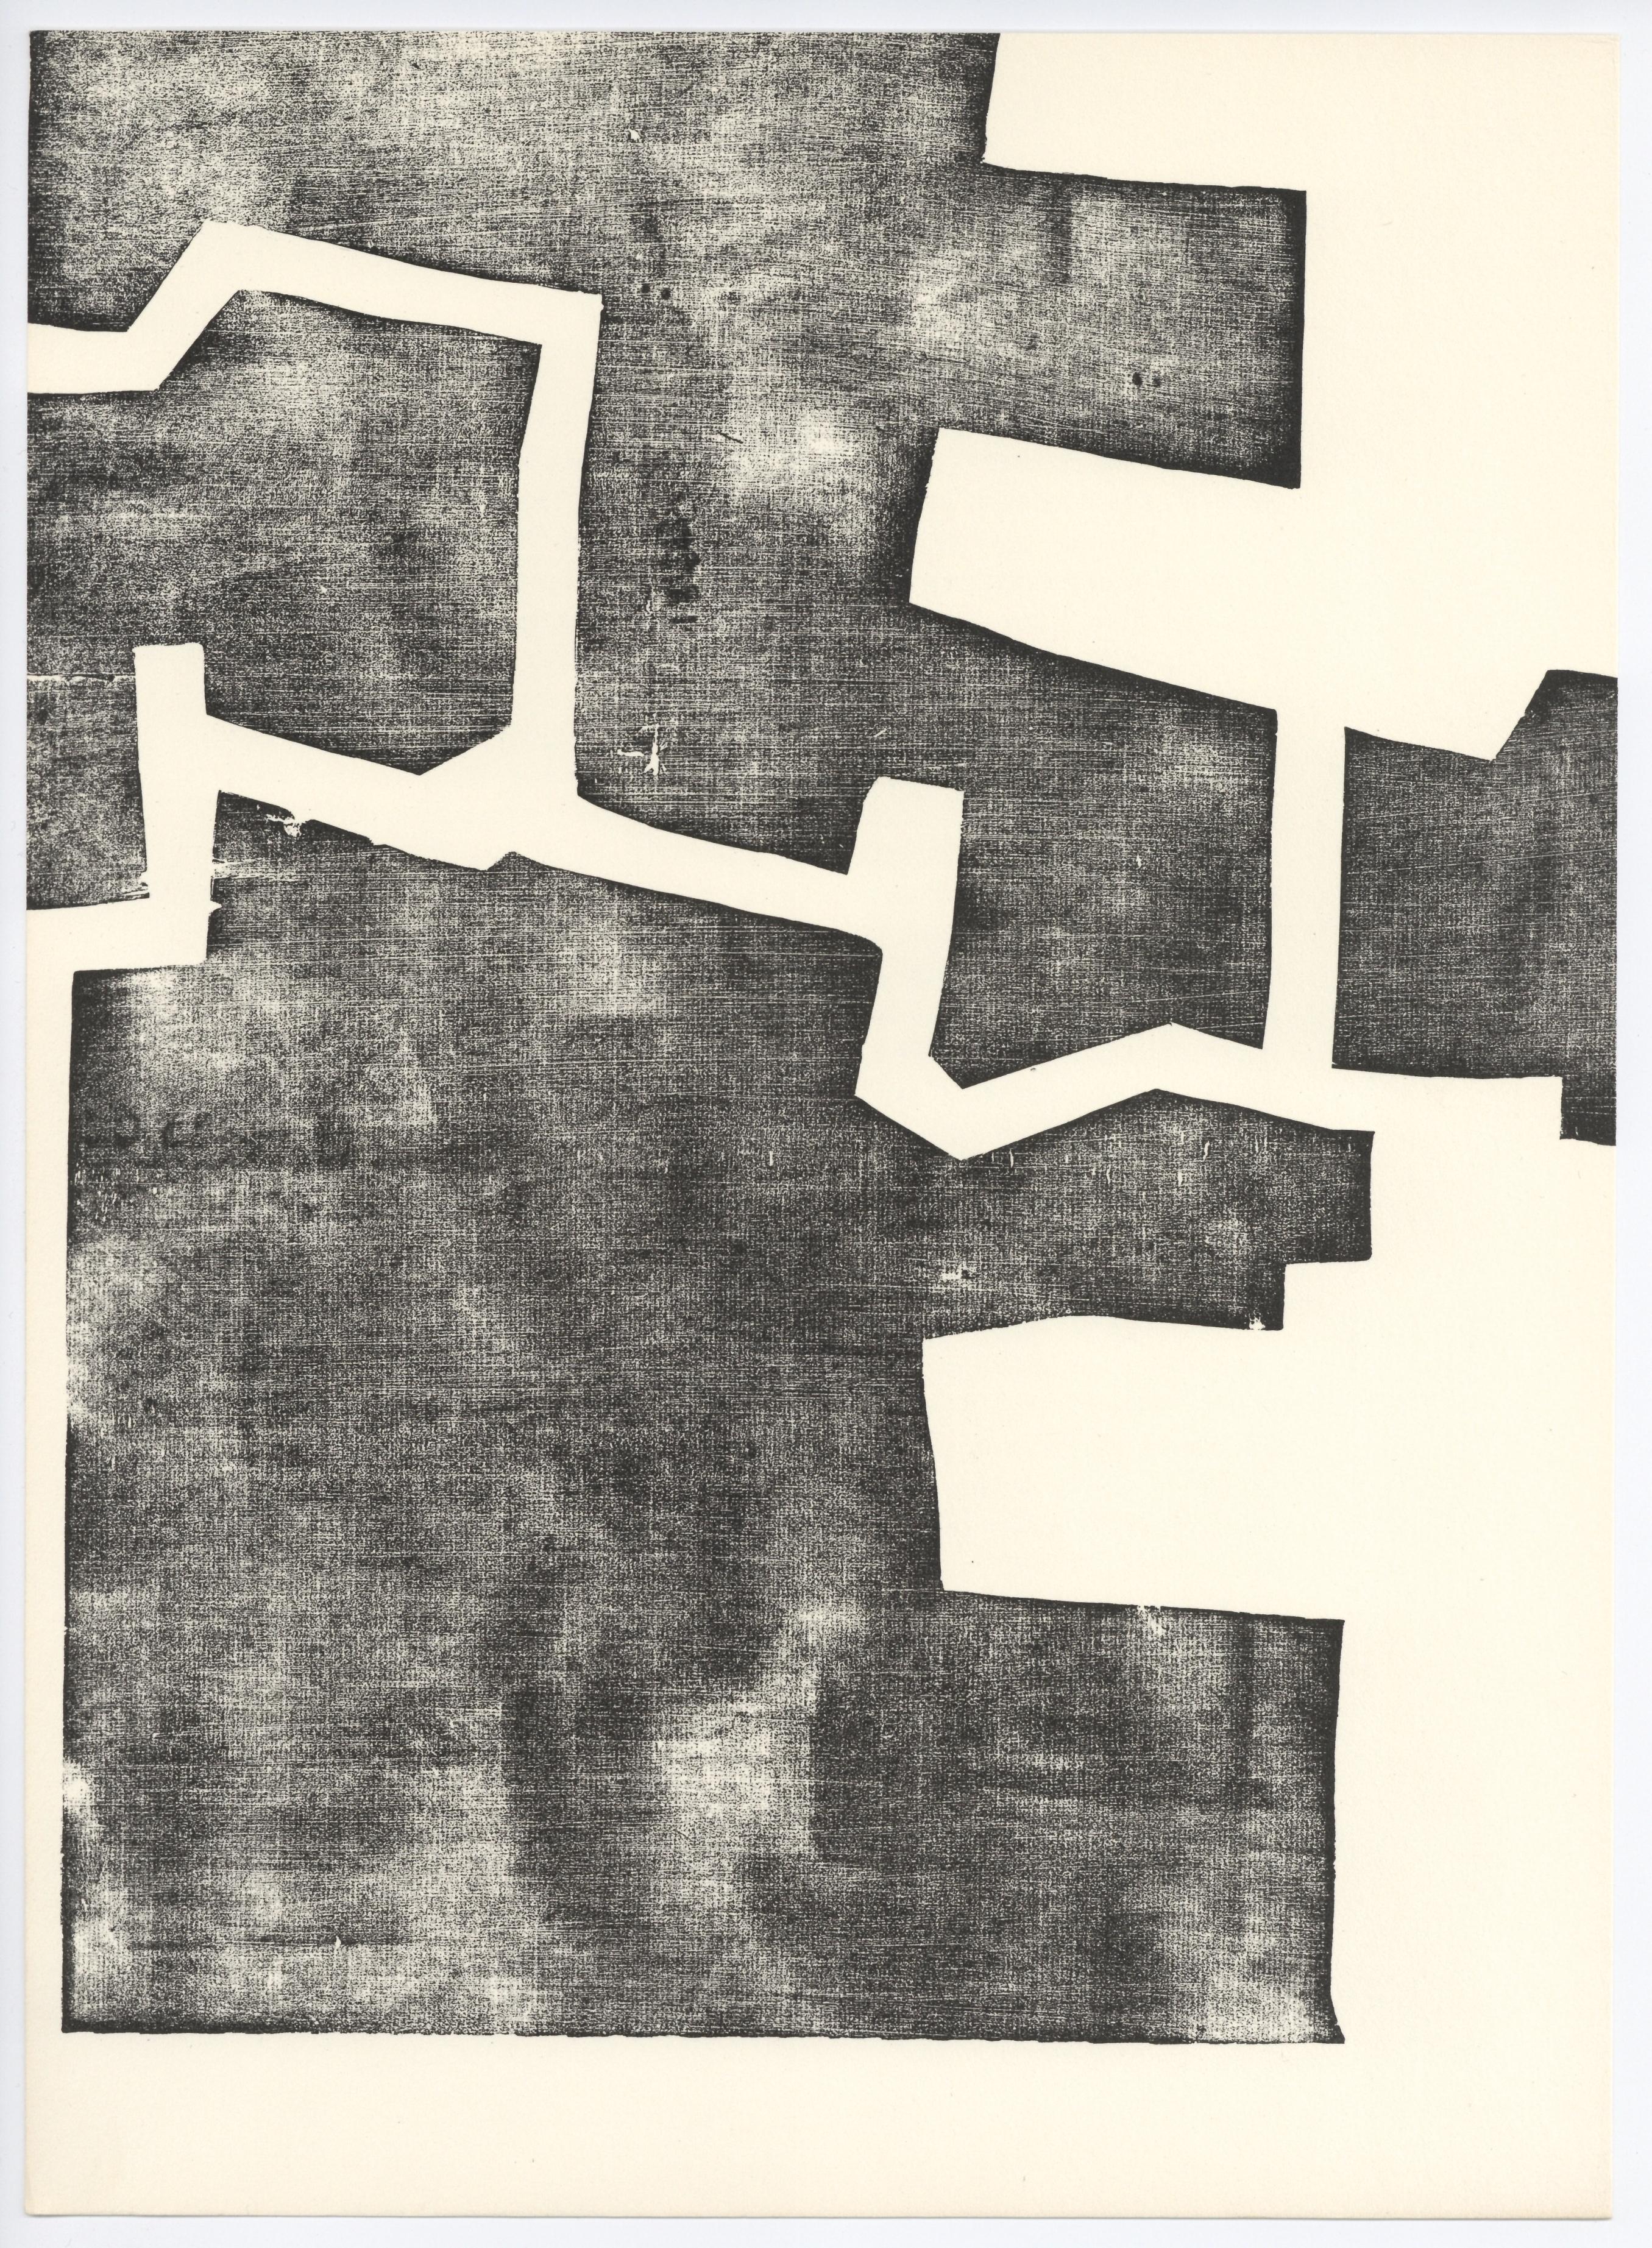 Medium: lithograph (after the woodcut). Published in Paris by Maeght for Derriere le Miroir (issue no. 174) in 1968, and printed on quality cream wove paper. Sheet size: 15 x 11 inches (380 x 275 mm). There is text on verso, as issued. Not